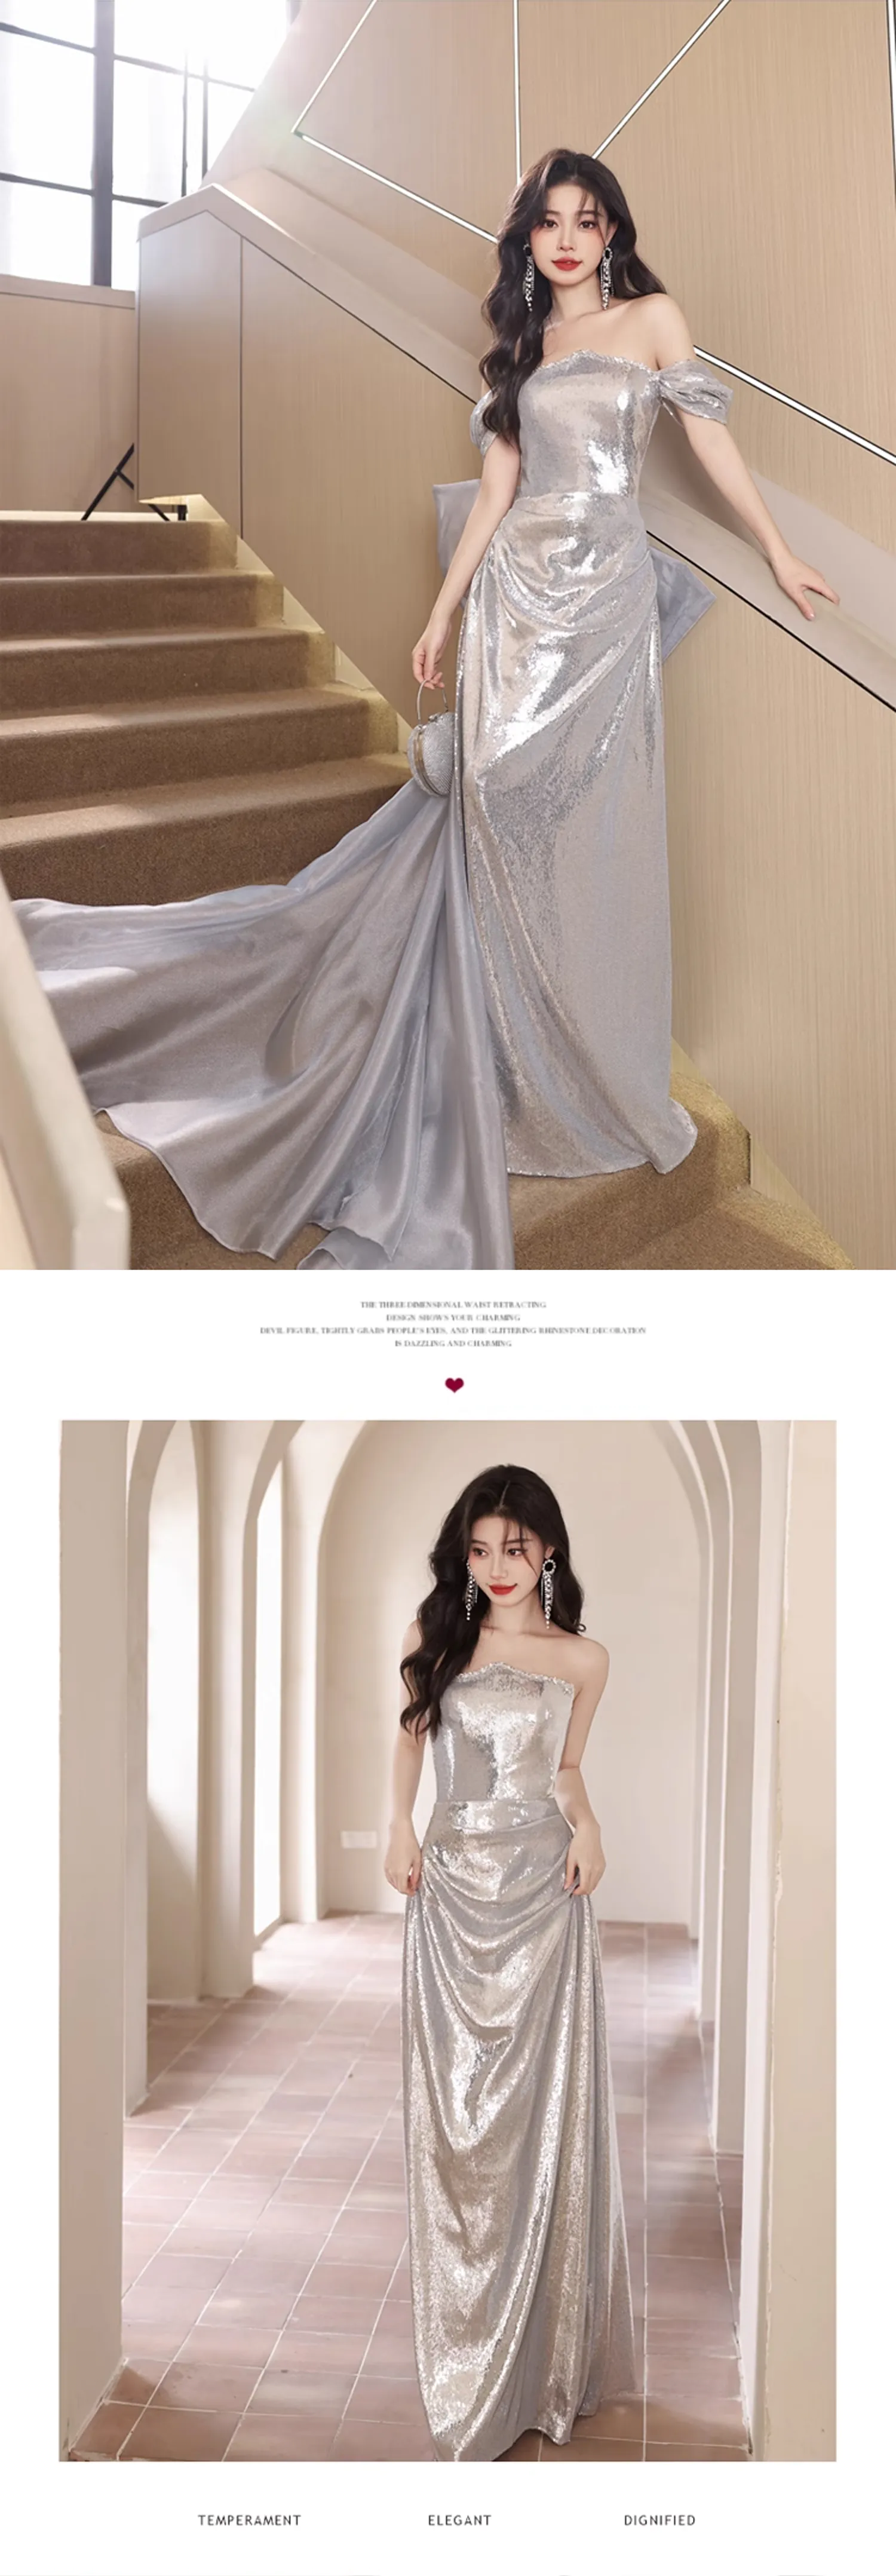 Luxury-Silver-Off-the-Shoulder-Prom-Dress-Charming-Long-Formal-Gown14